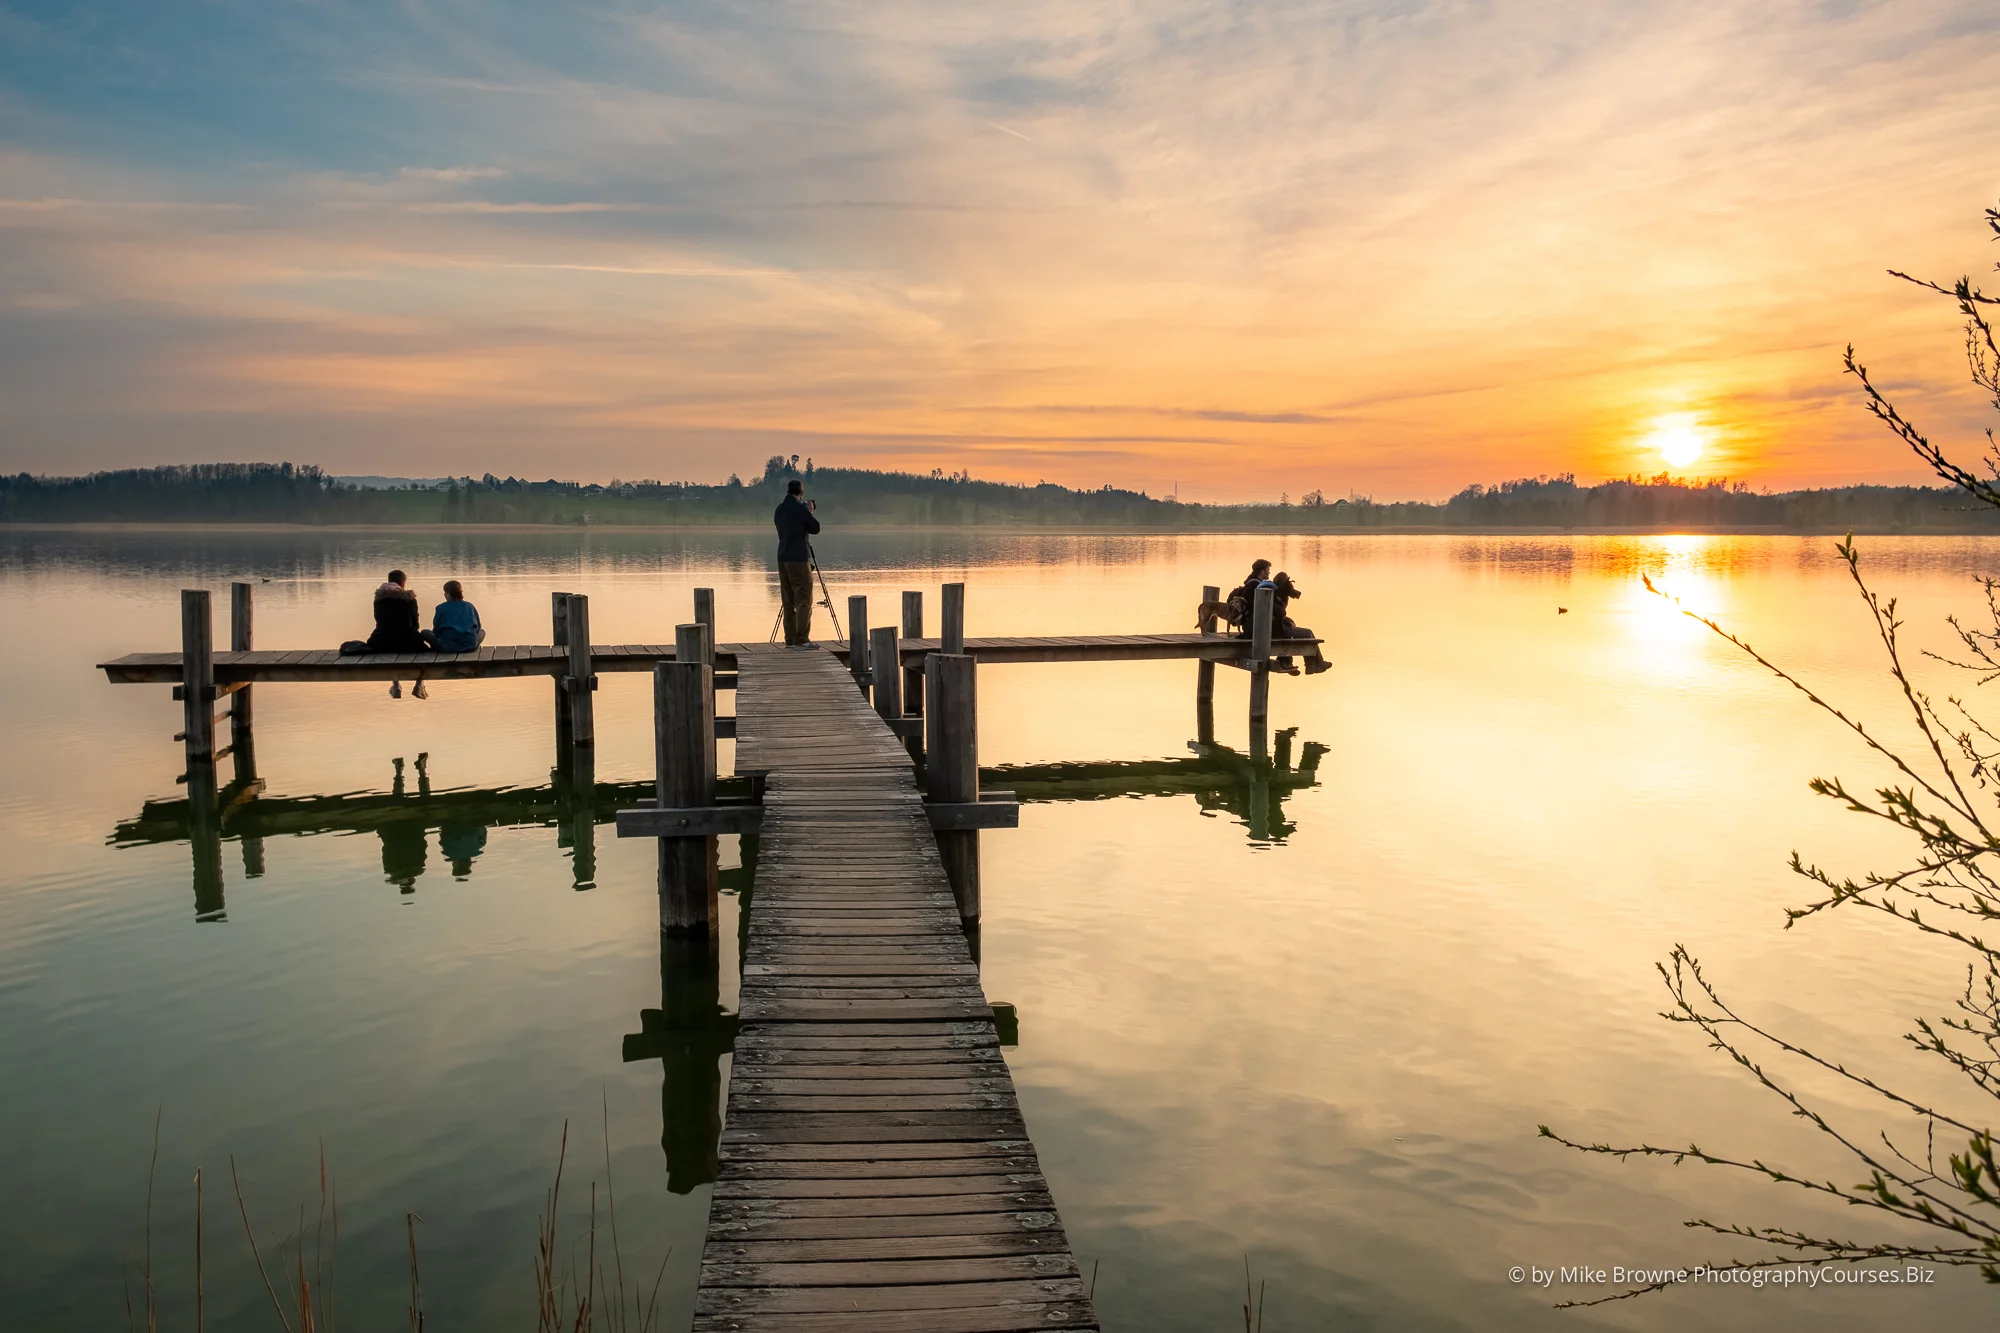 5 people photographing sunset at lake Pfäffikersee